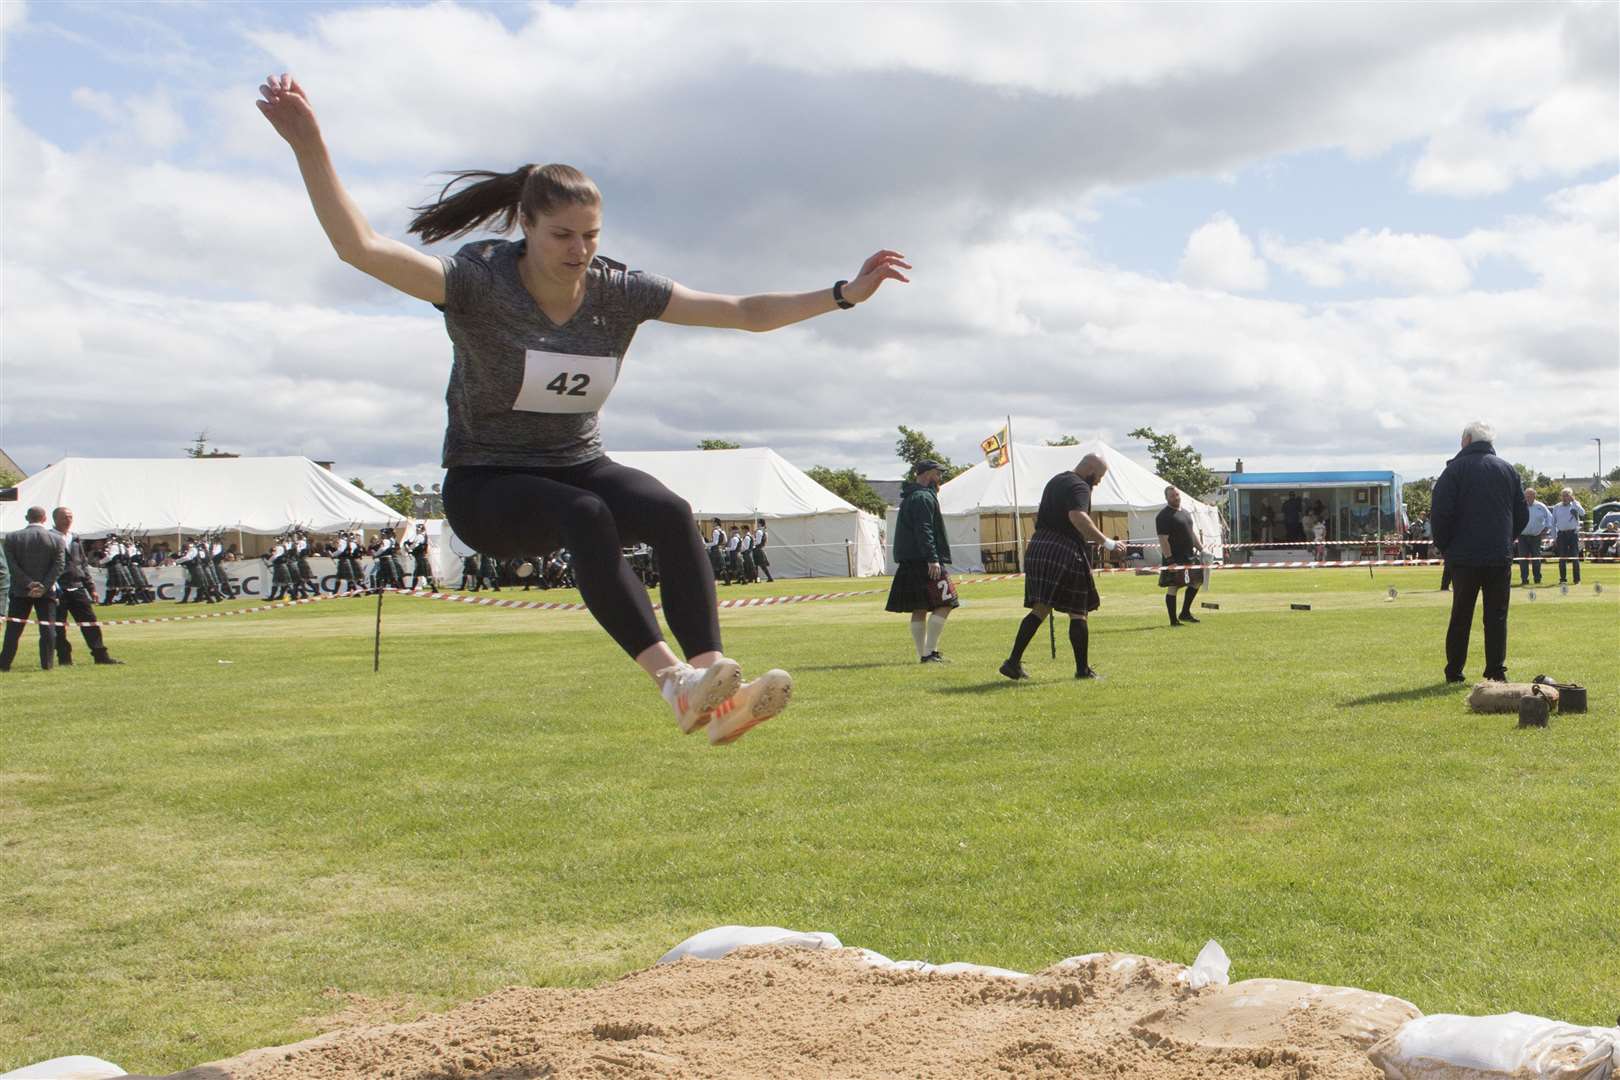 Nikki Manson set a new women's record of 15 feet 1 inch in the long jump. Picture: Robert MacDonald / Northern Studios